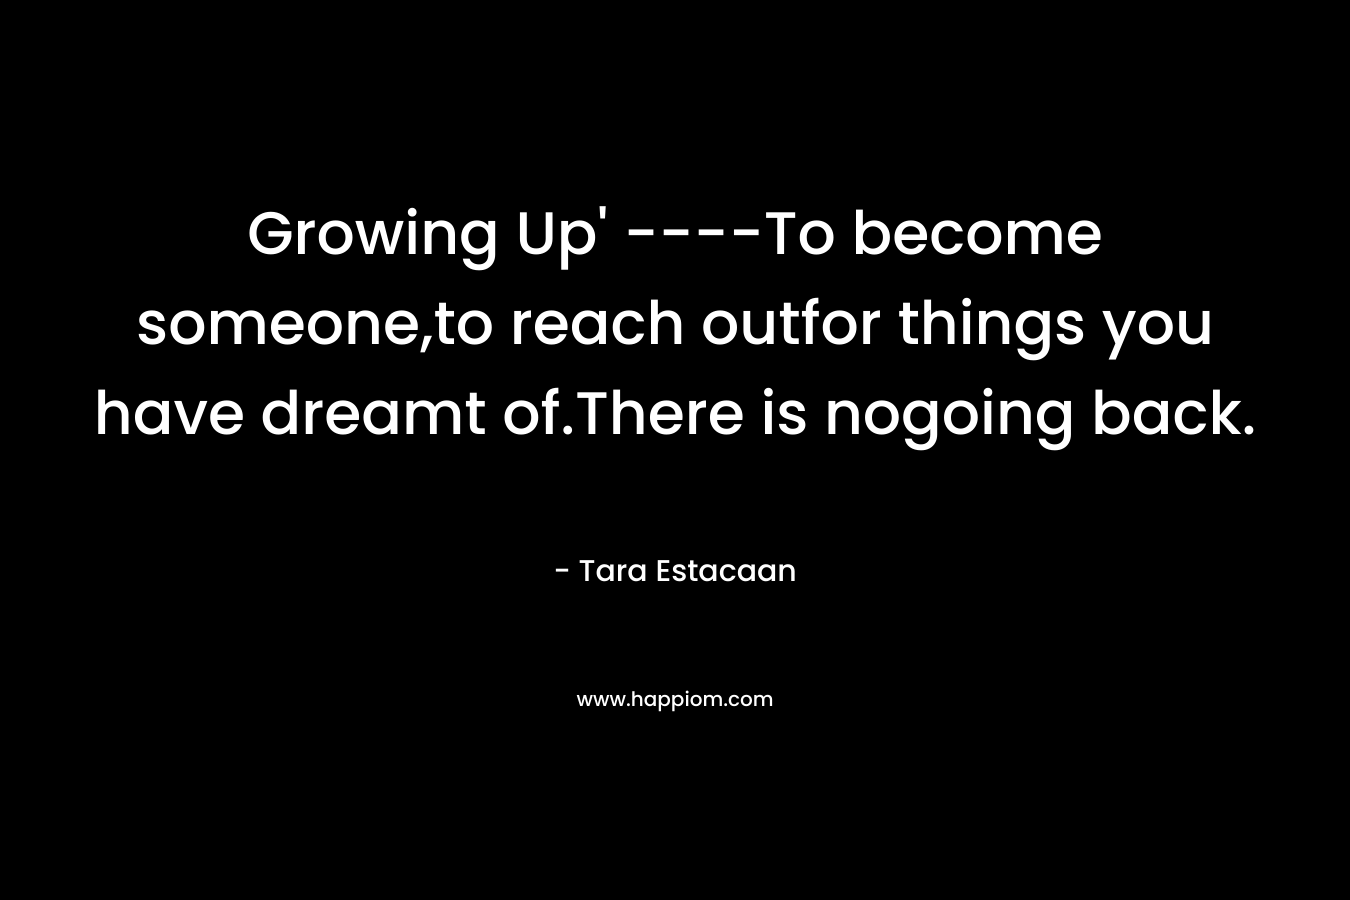 Growing Up' ----To become someone,to reach outfor things you have dreamt of.There is nogoing back.